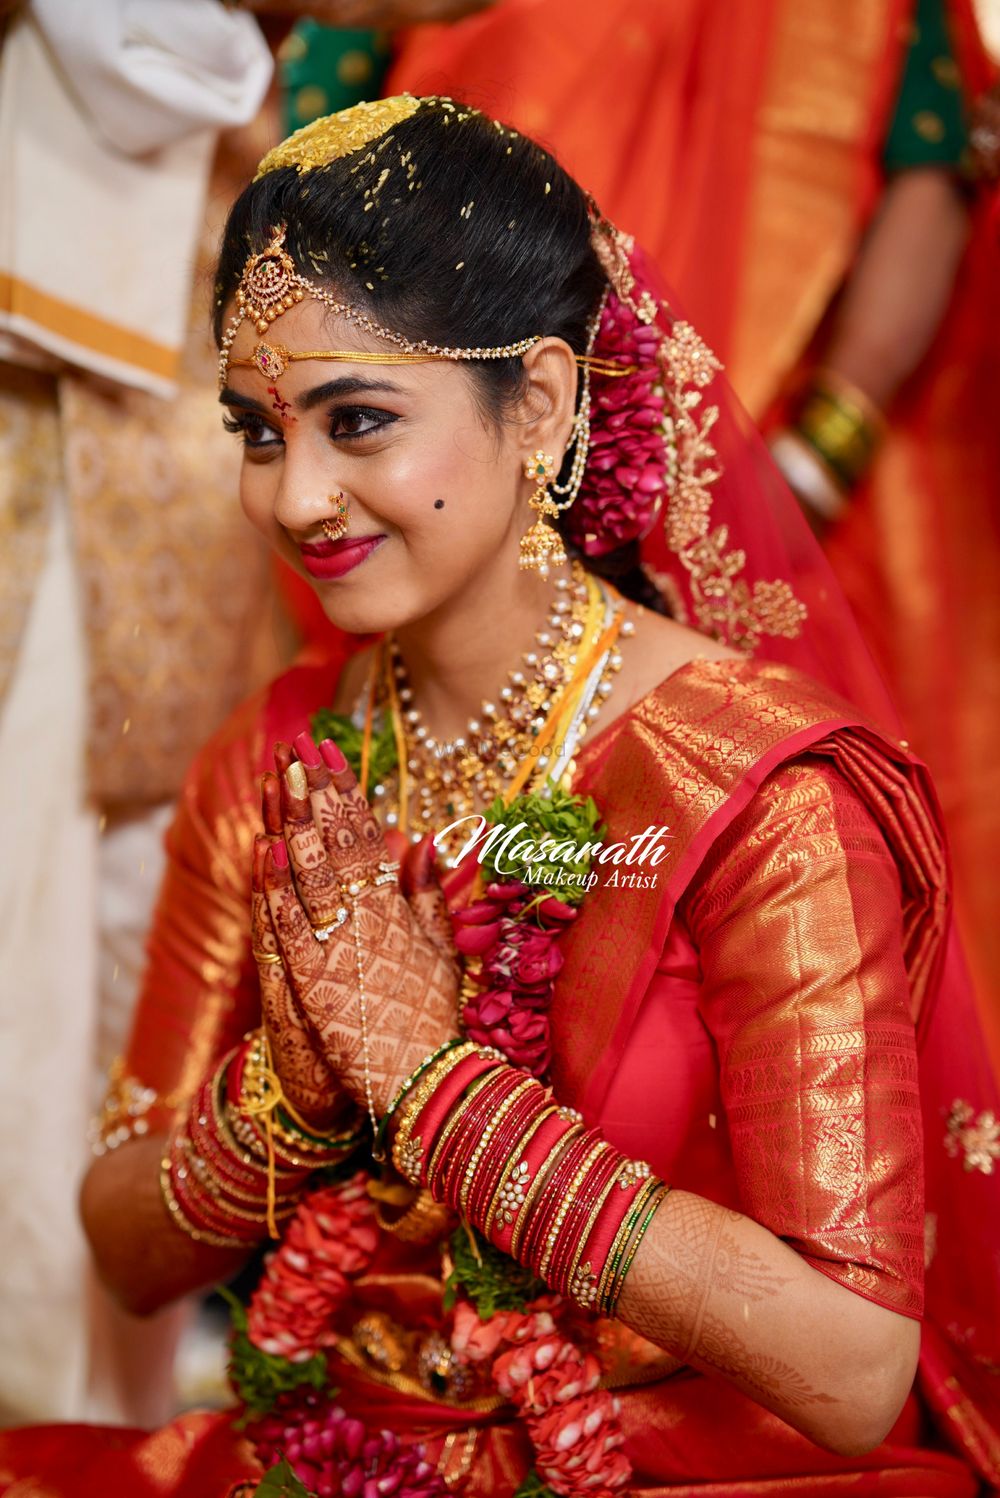 Photo From South Indian looks - By Masarrath Makeup Artist 